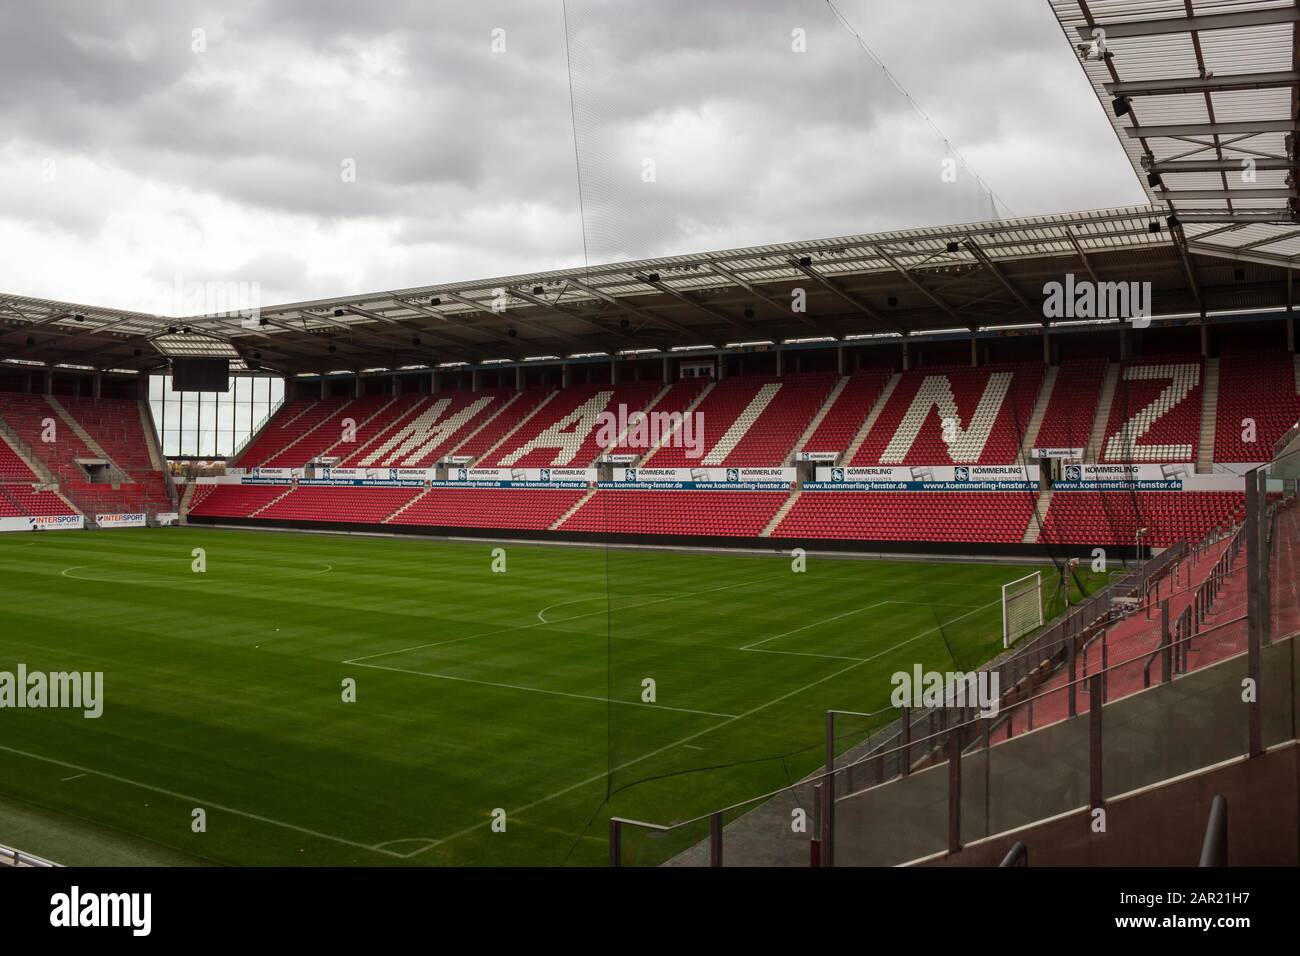 Mainz Germany Nov 11 18 Stadium Of Football Soccer Club 1 Fsv Mainz 05 Currently Playing In The First National League In Germany Stock Photo Alamy